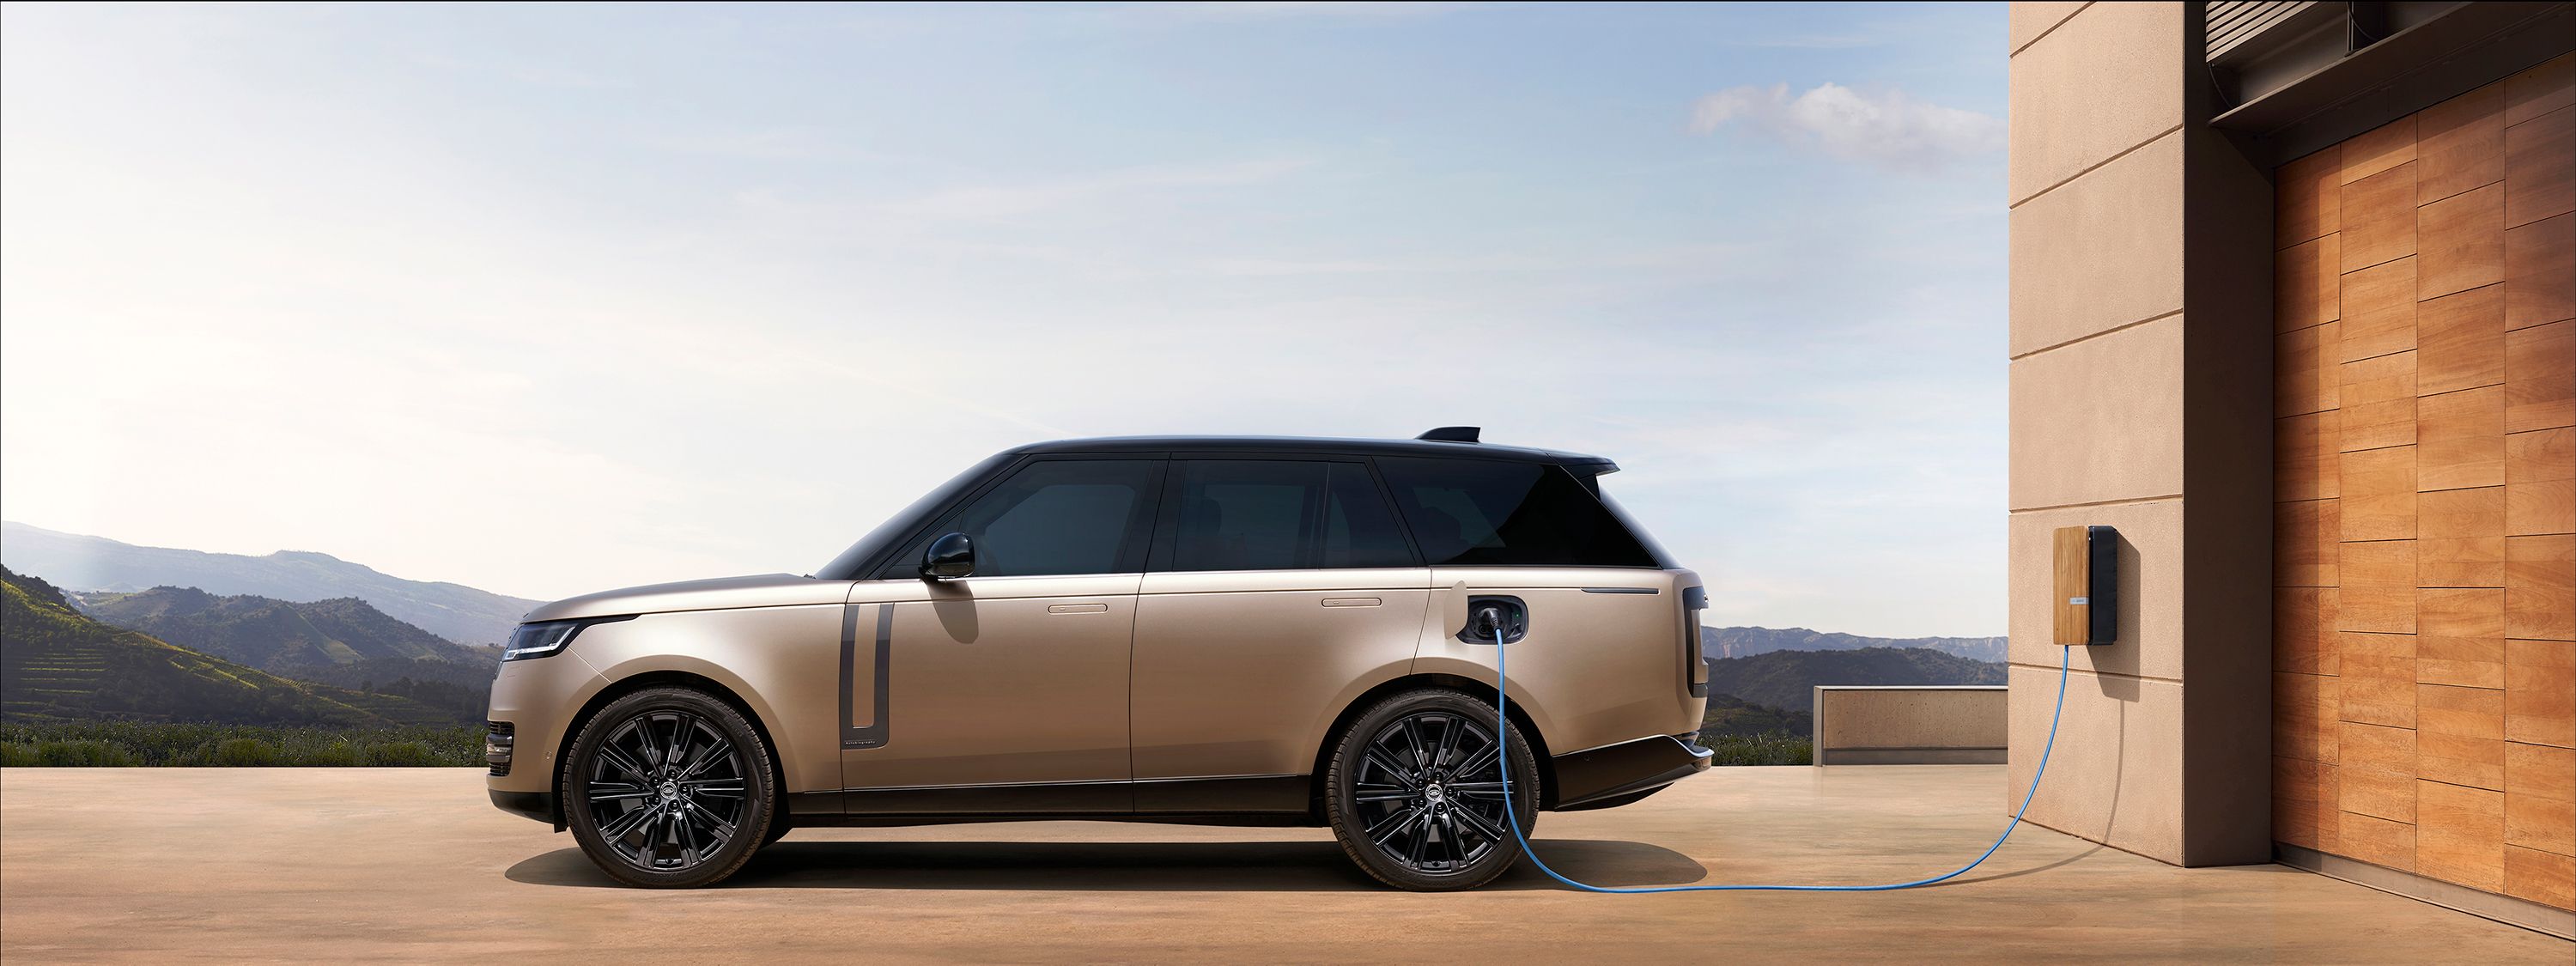 2022 Range Rover: Official Photo From Every Angle